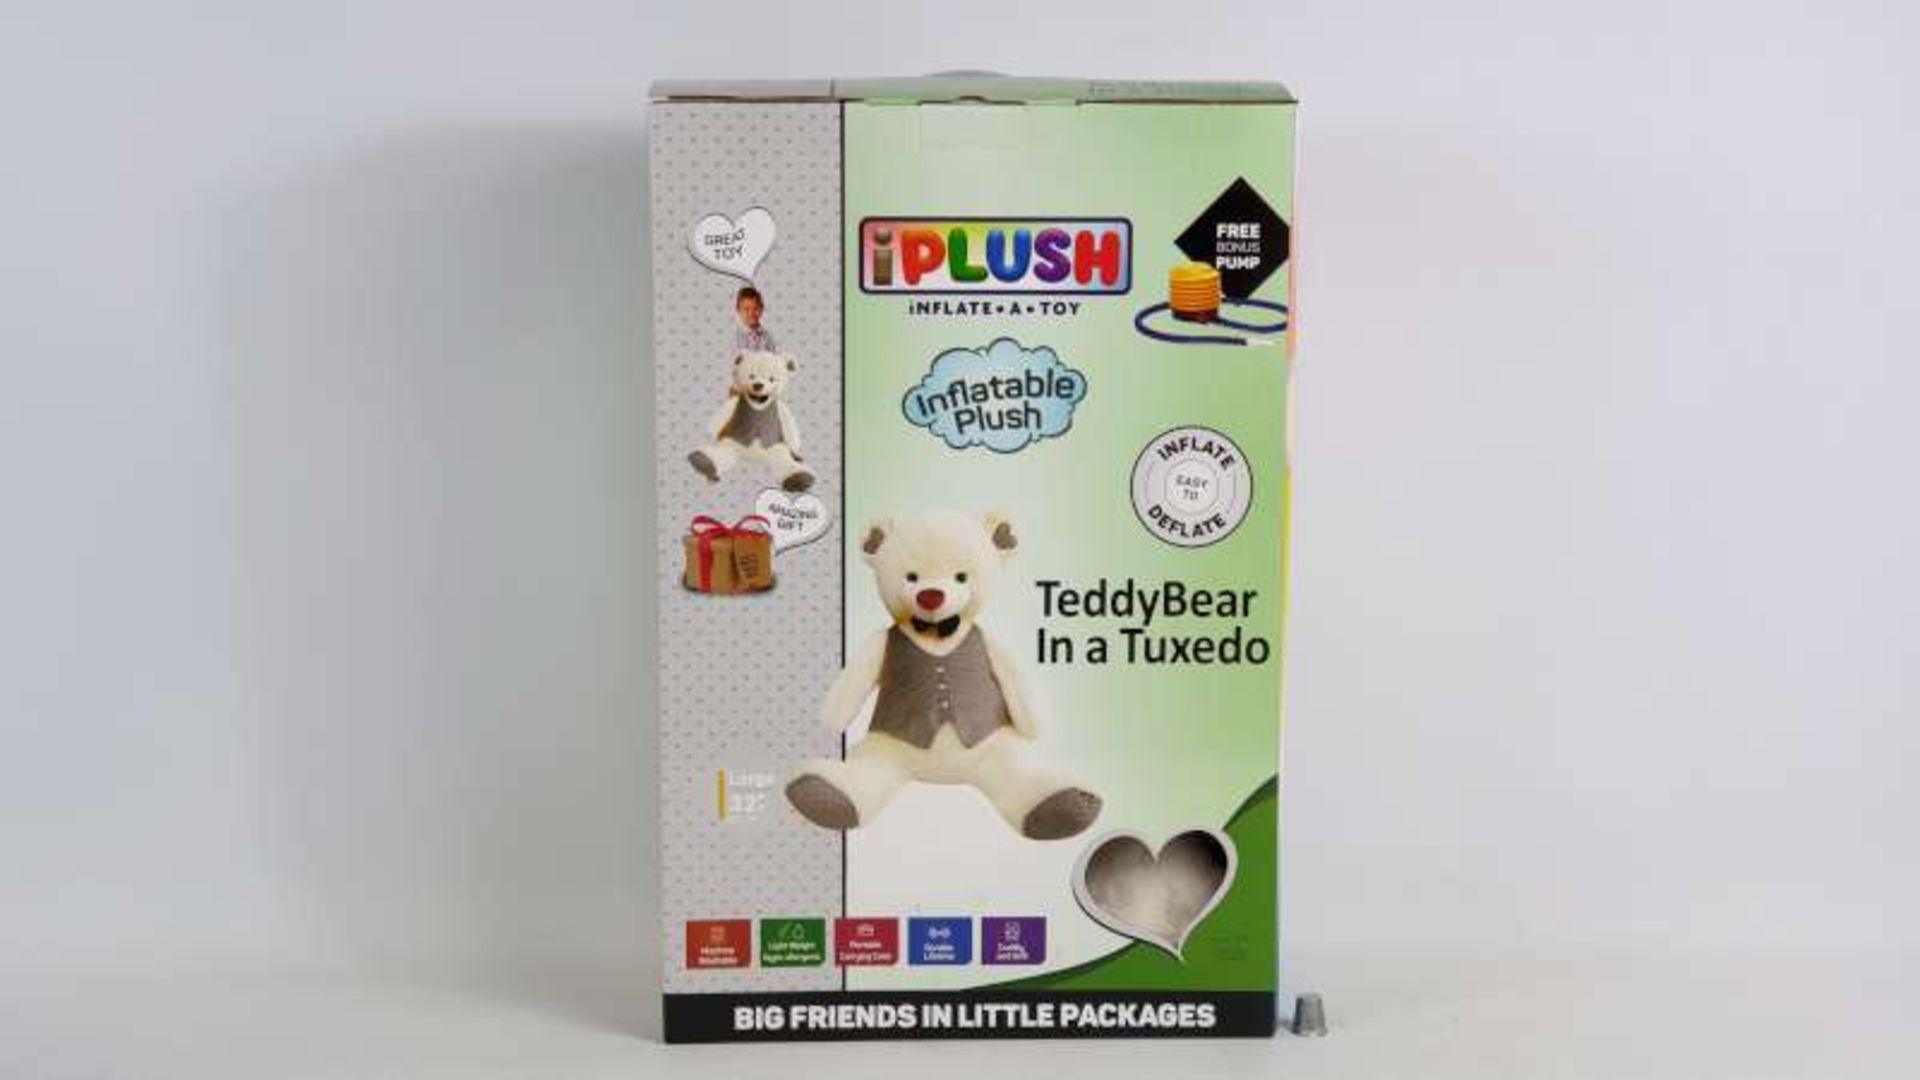 12 X IPLUSH INFLATABLE TEDDY BEAR IN A TUXEDO SIZE 32" IN 2 BOXES